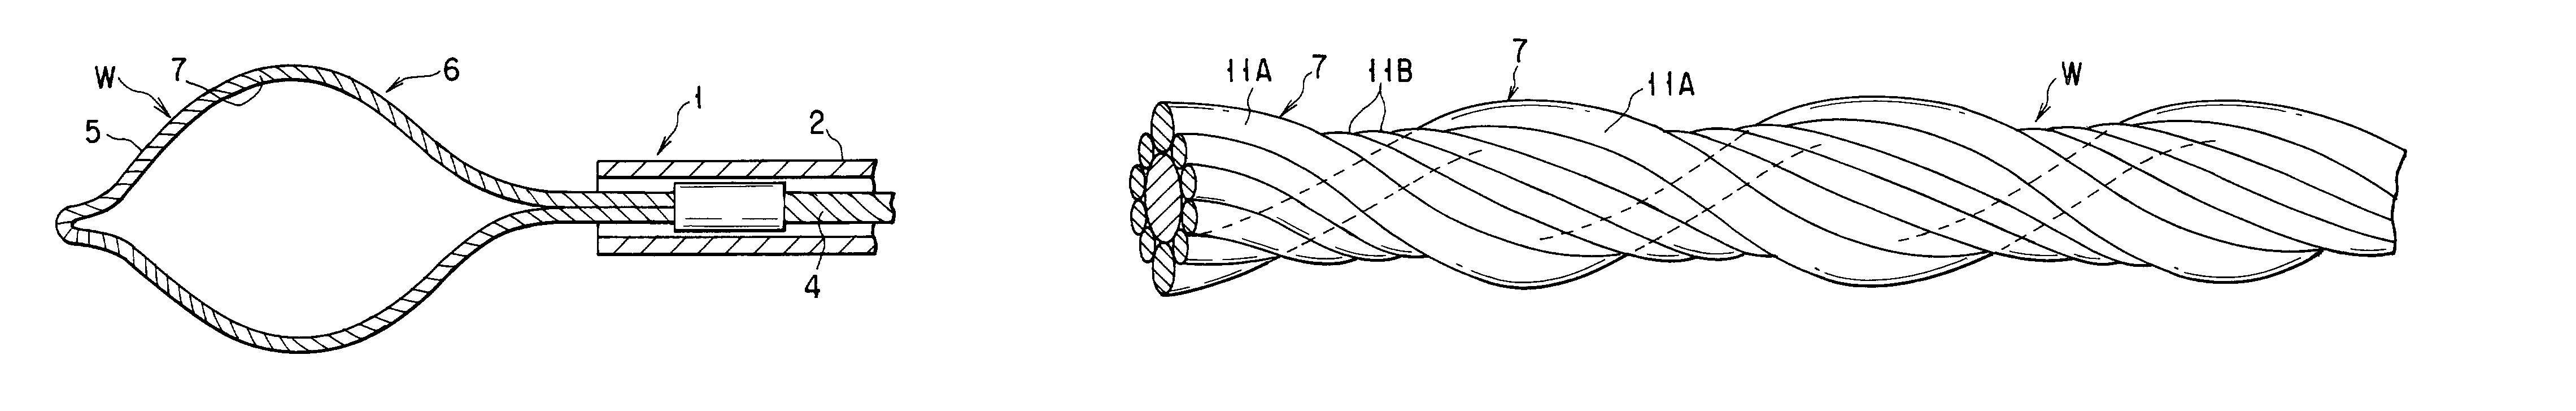 Treatment device for endoscope